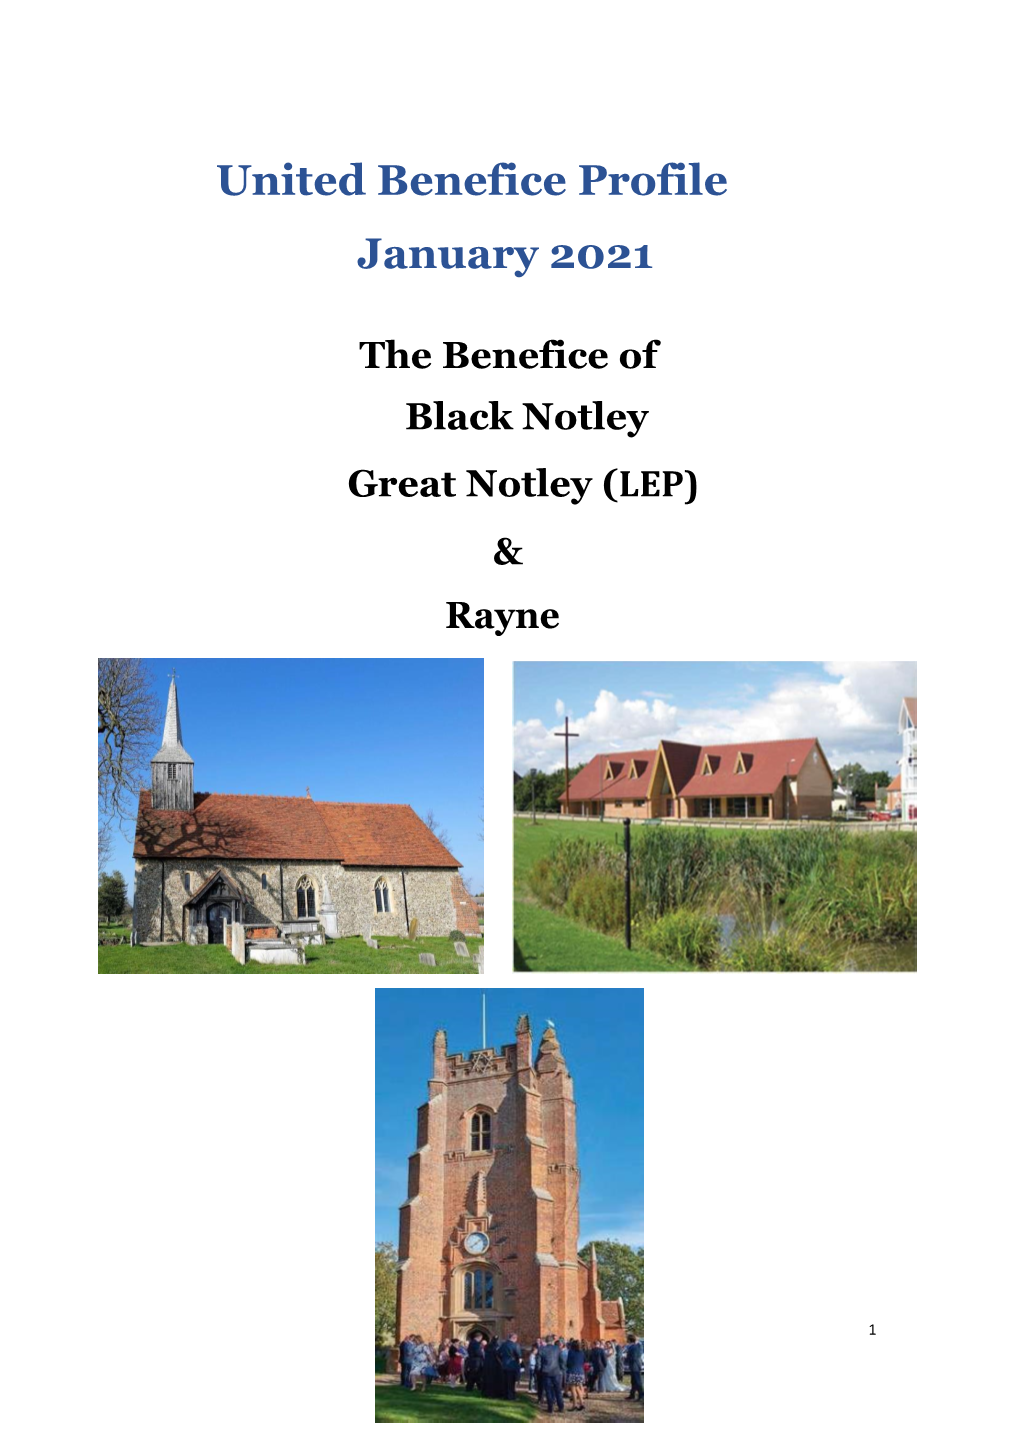 The Benefice of Black Notley Great Notley (LEP) & Rayne